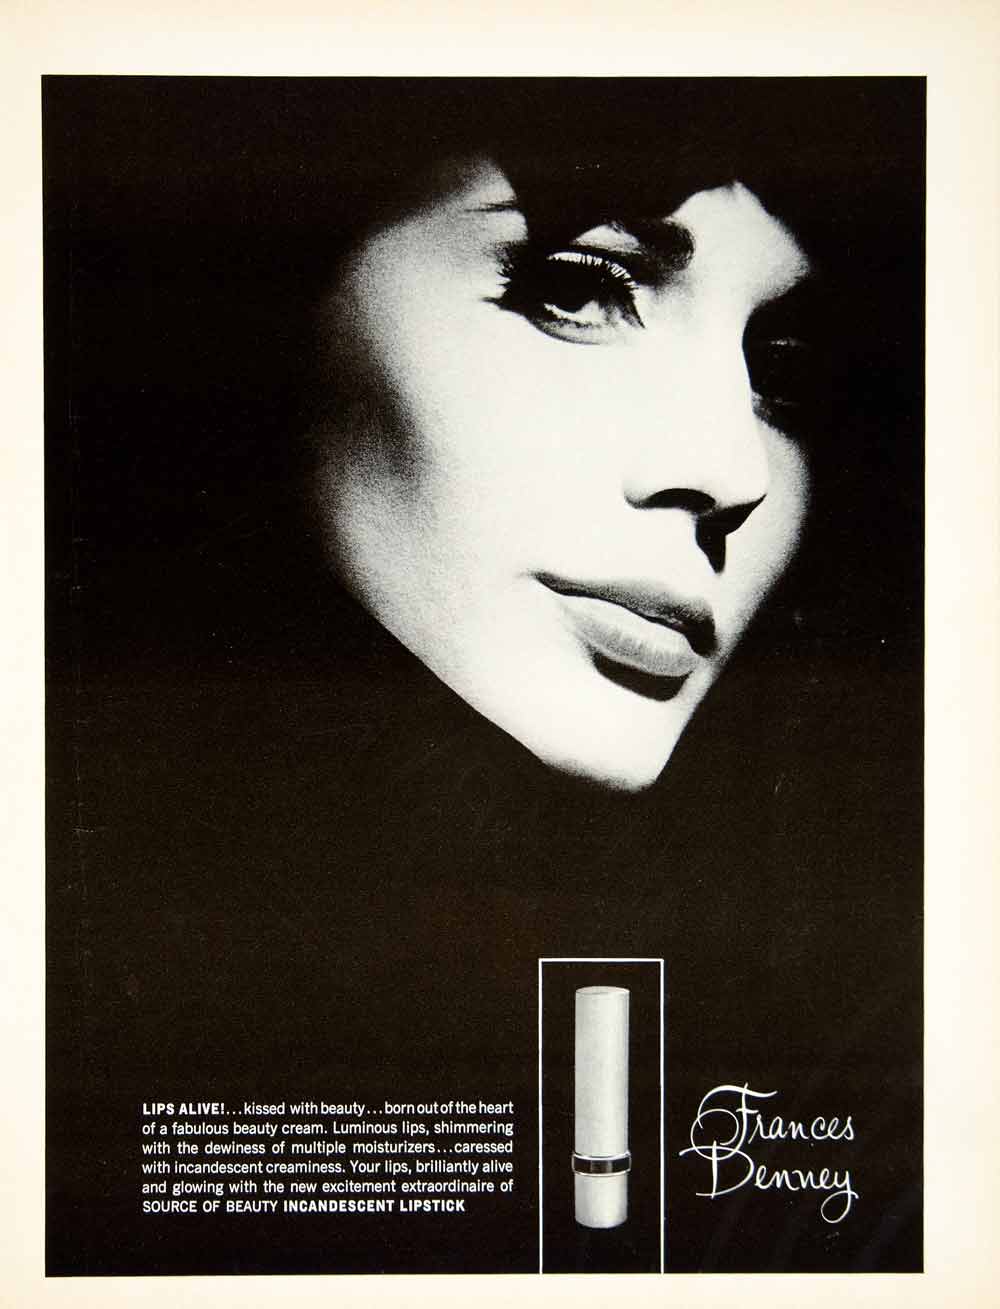 1966 Ad Vintage Frances Denney Incandescent Lipstick Lips Beauty Cosmetic YMMA1